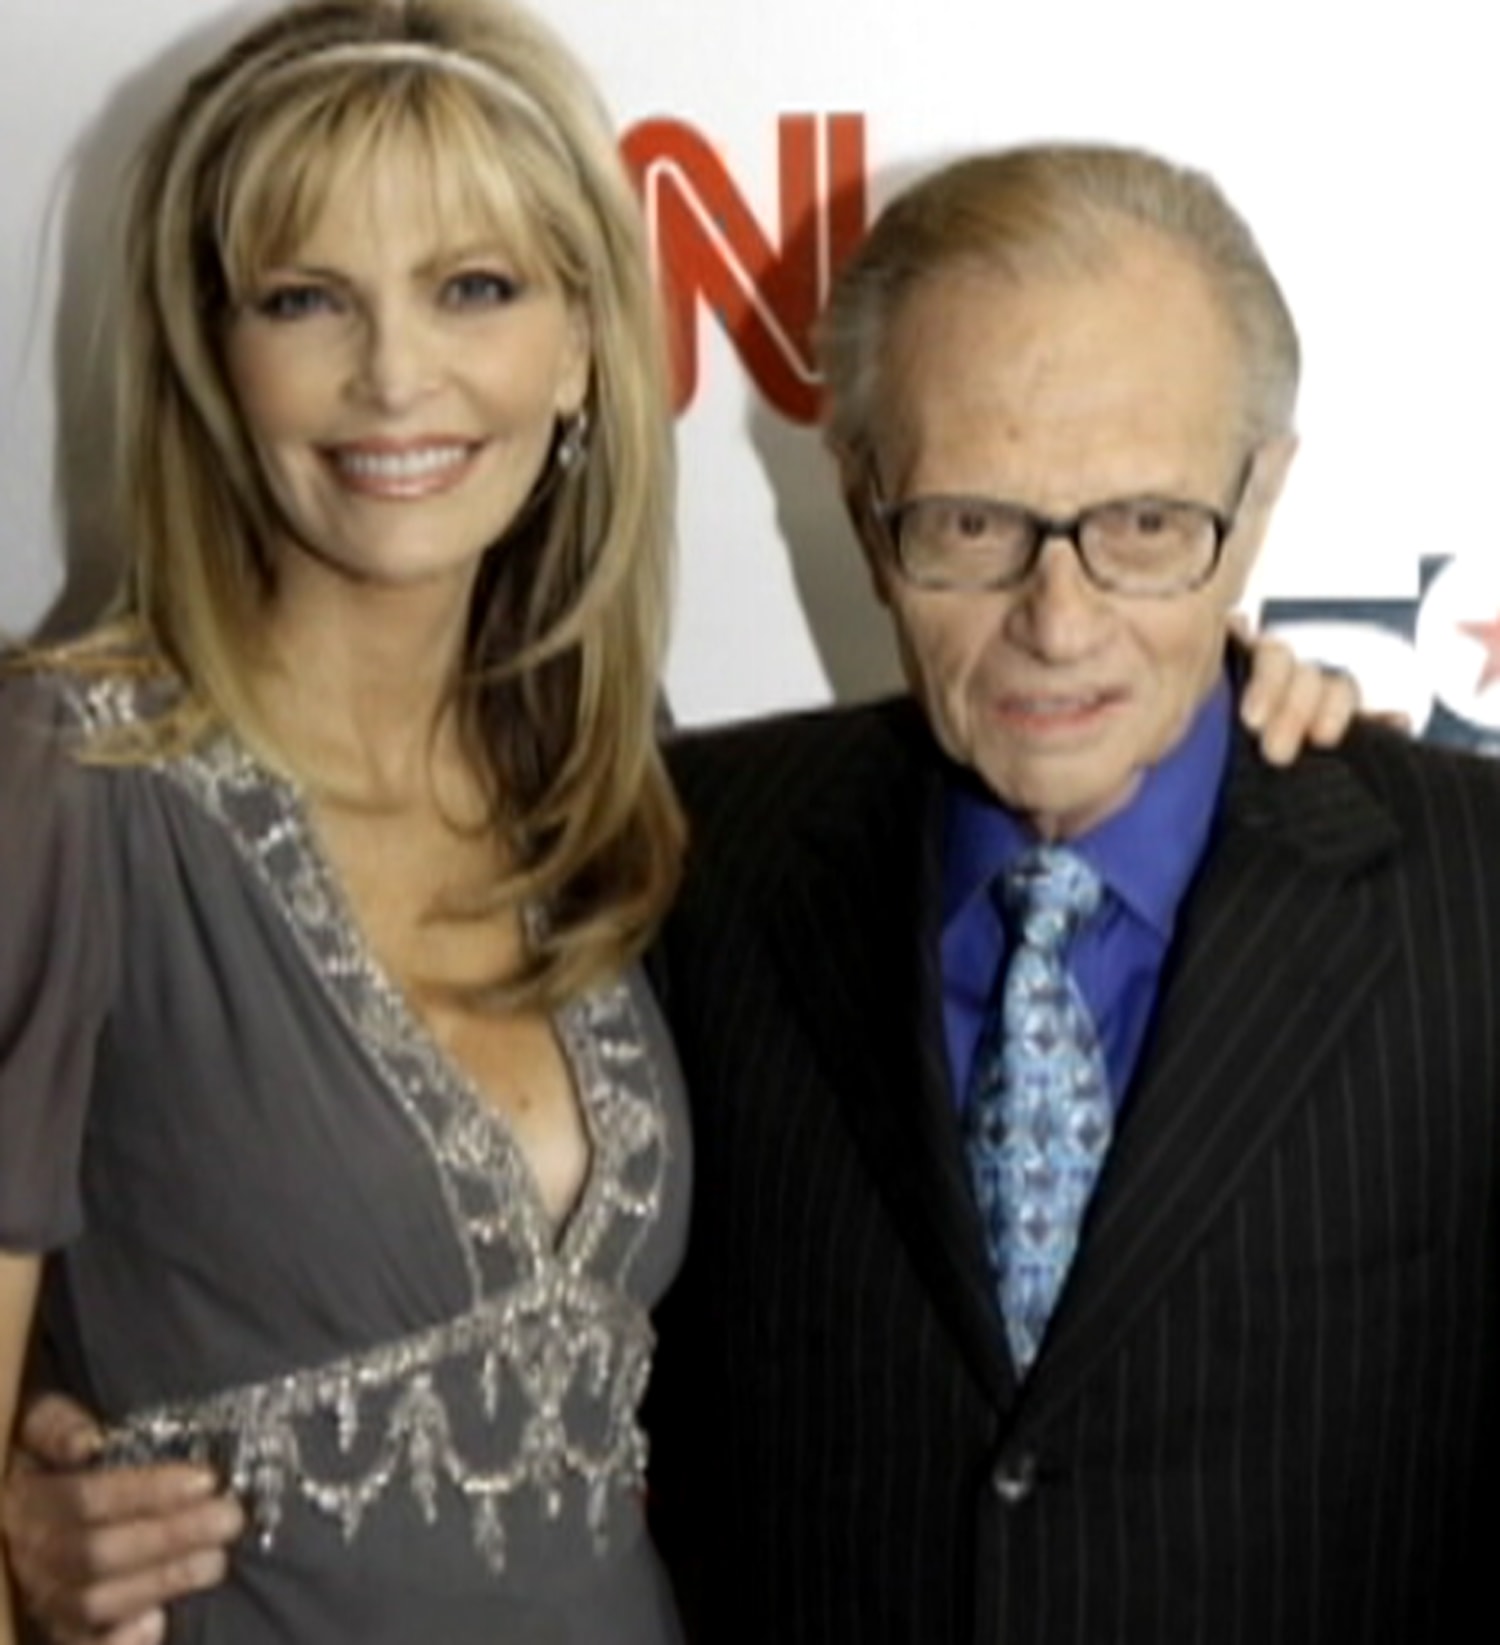 Did Larry King cheat on wife with her photo